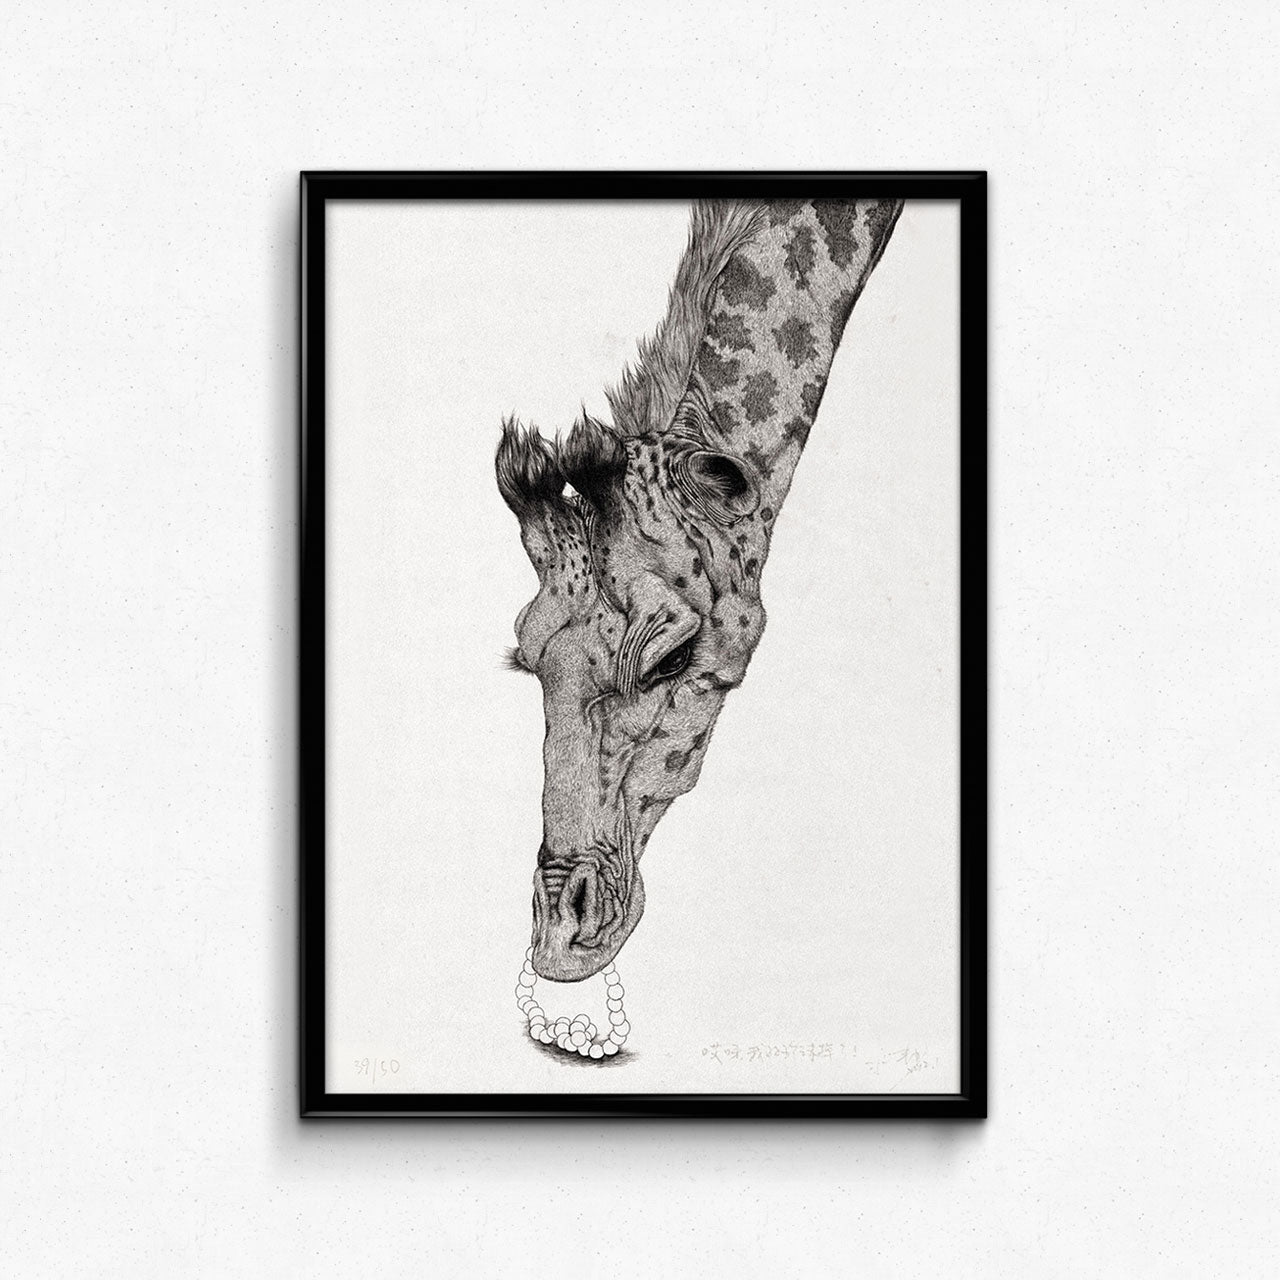 Animal Series Floating Zoo Art Print No.17 - Giraffe: Oh! My Pearls Fell Out! - Print - Lavender Home London